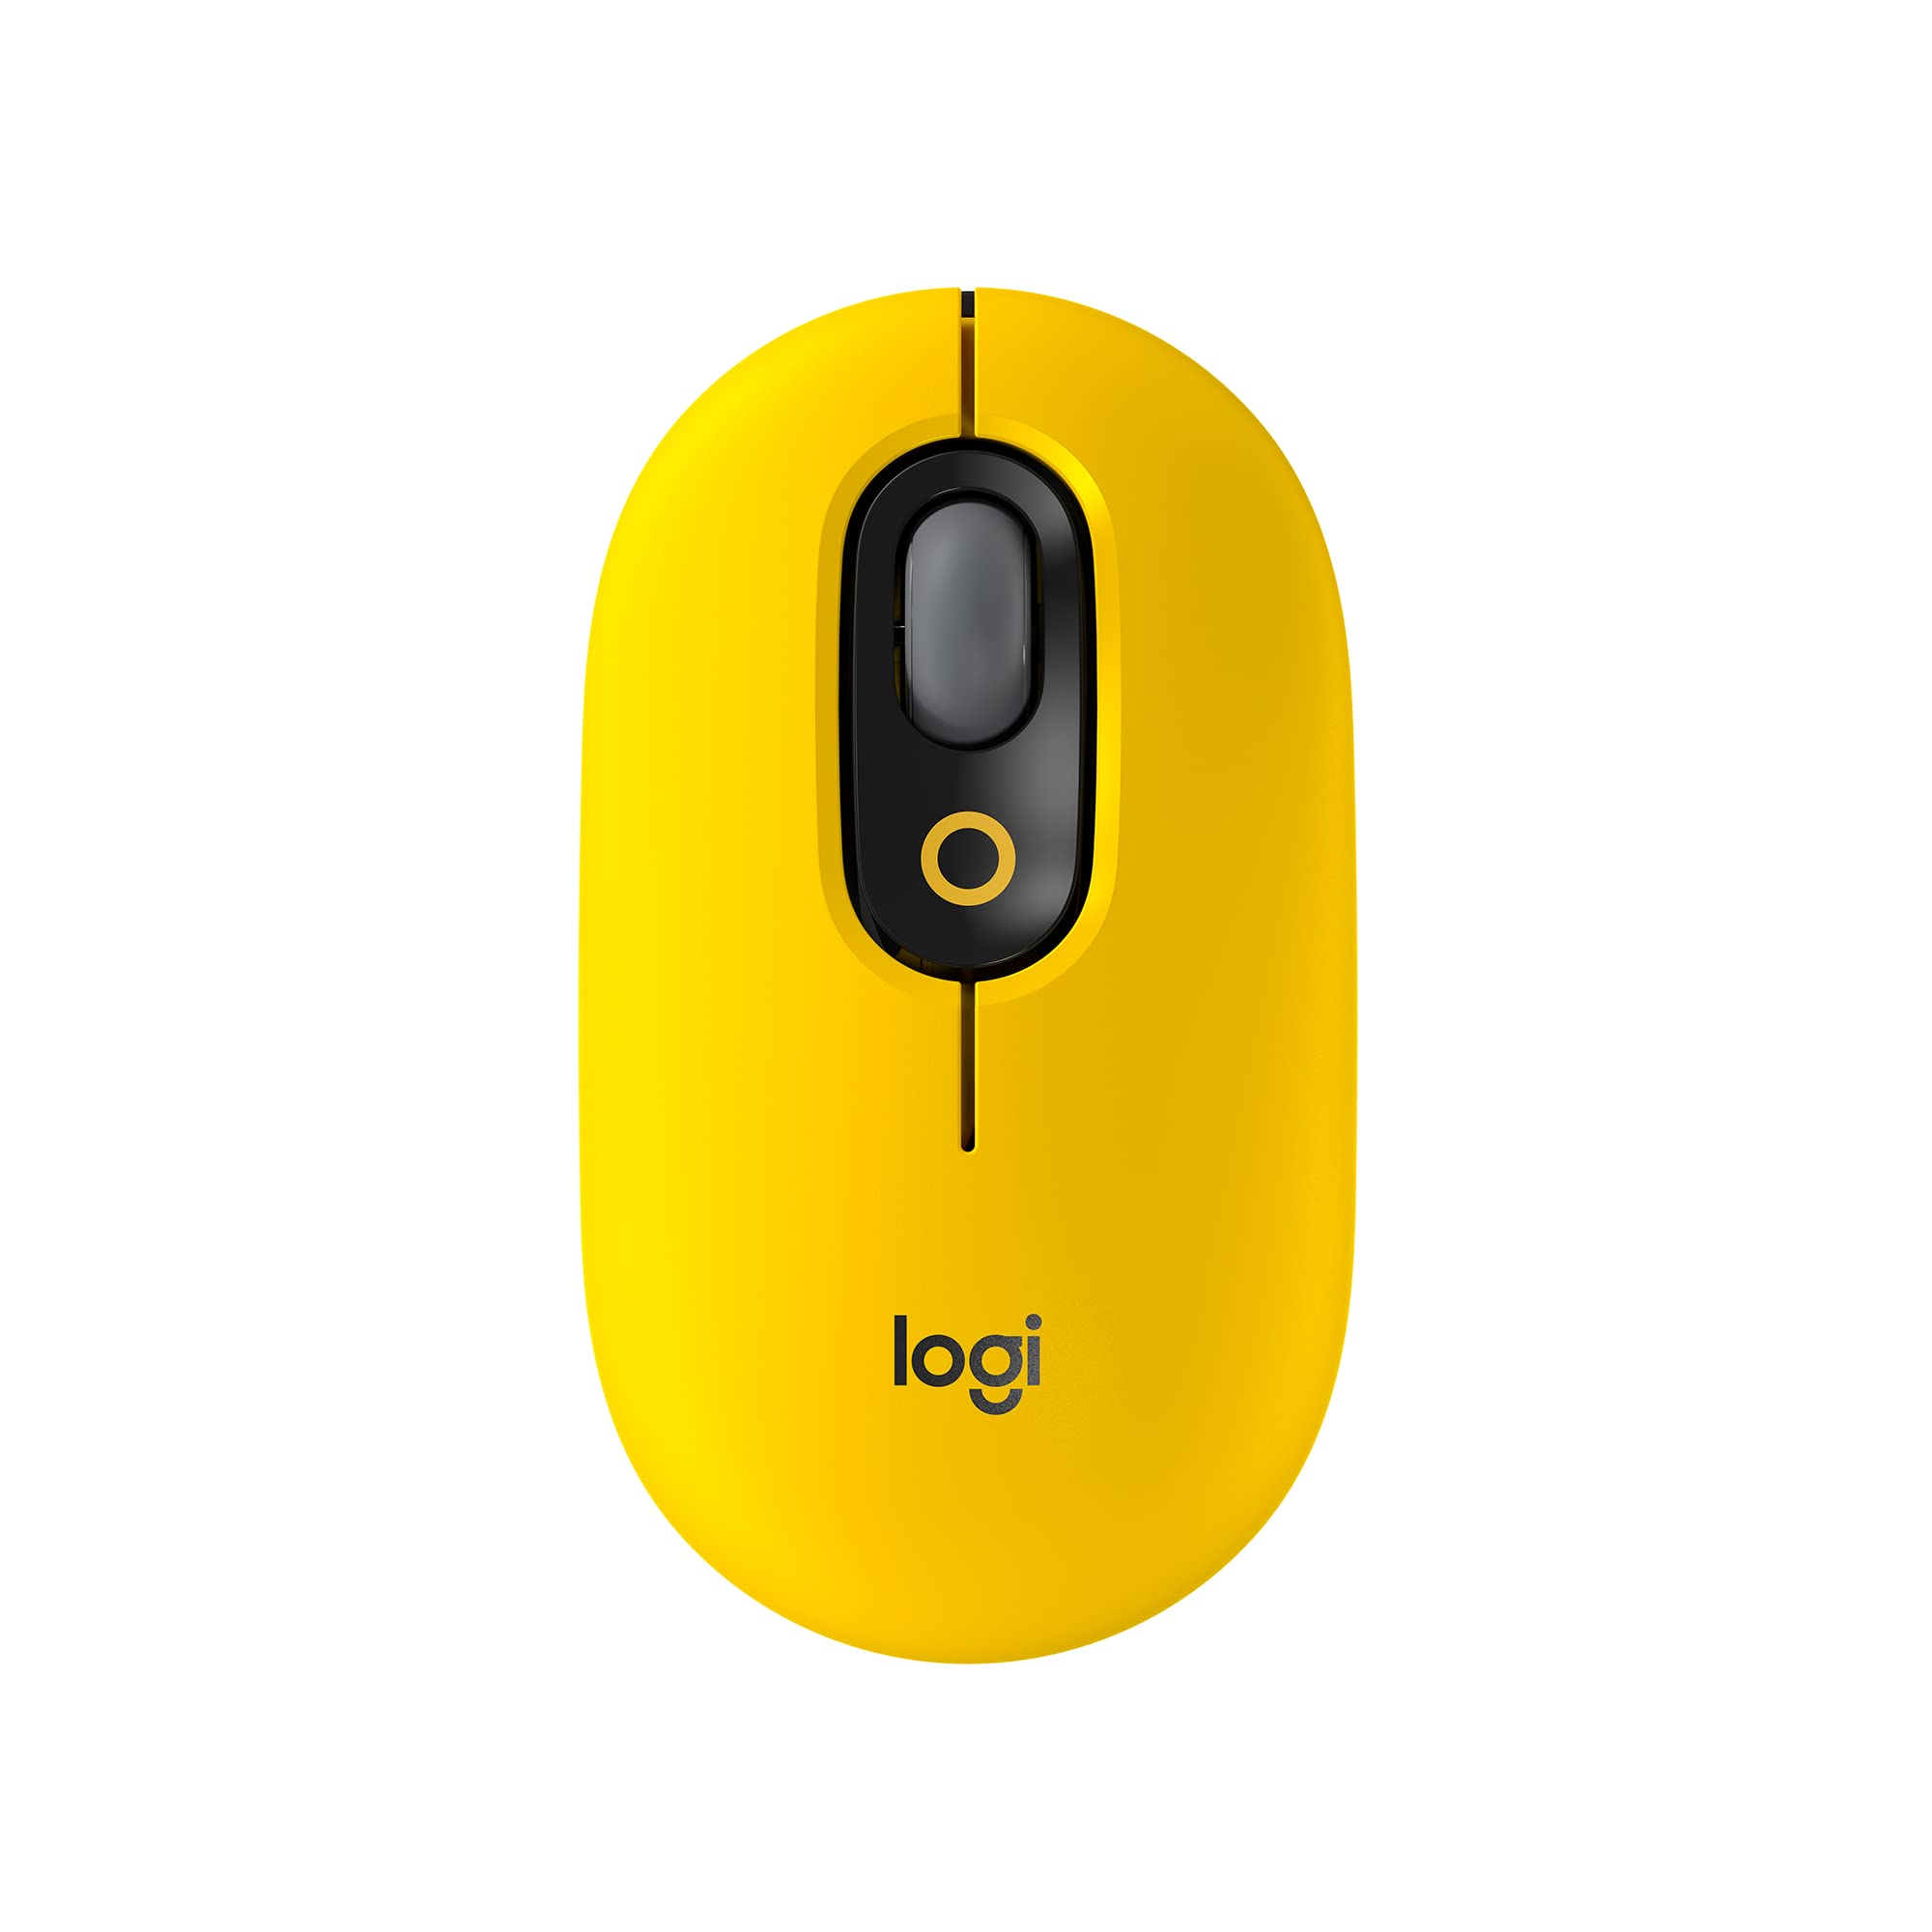 Logitech POP Mouse, Wireless Mouse with Customizable Emojis, SilentTouch Technology, Precision/Speed Scroll, Compact Design, Bluetooth, OS Compatible - Blast Yellow $19.99